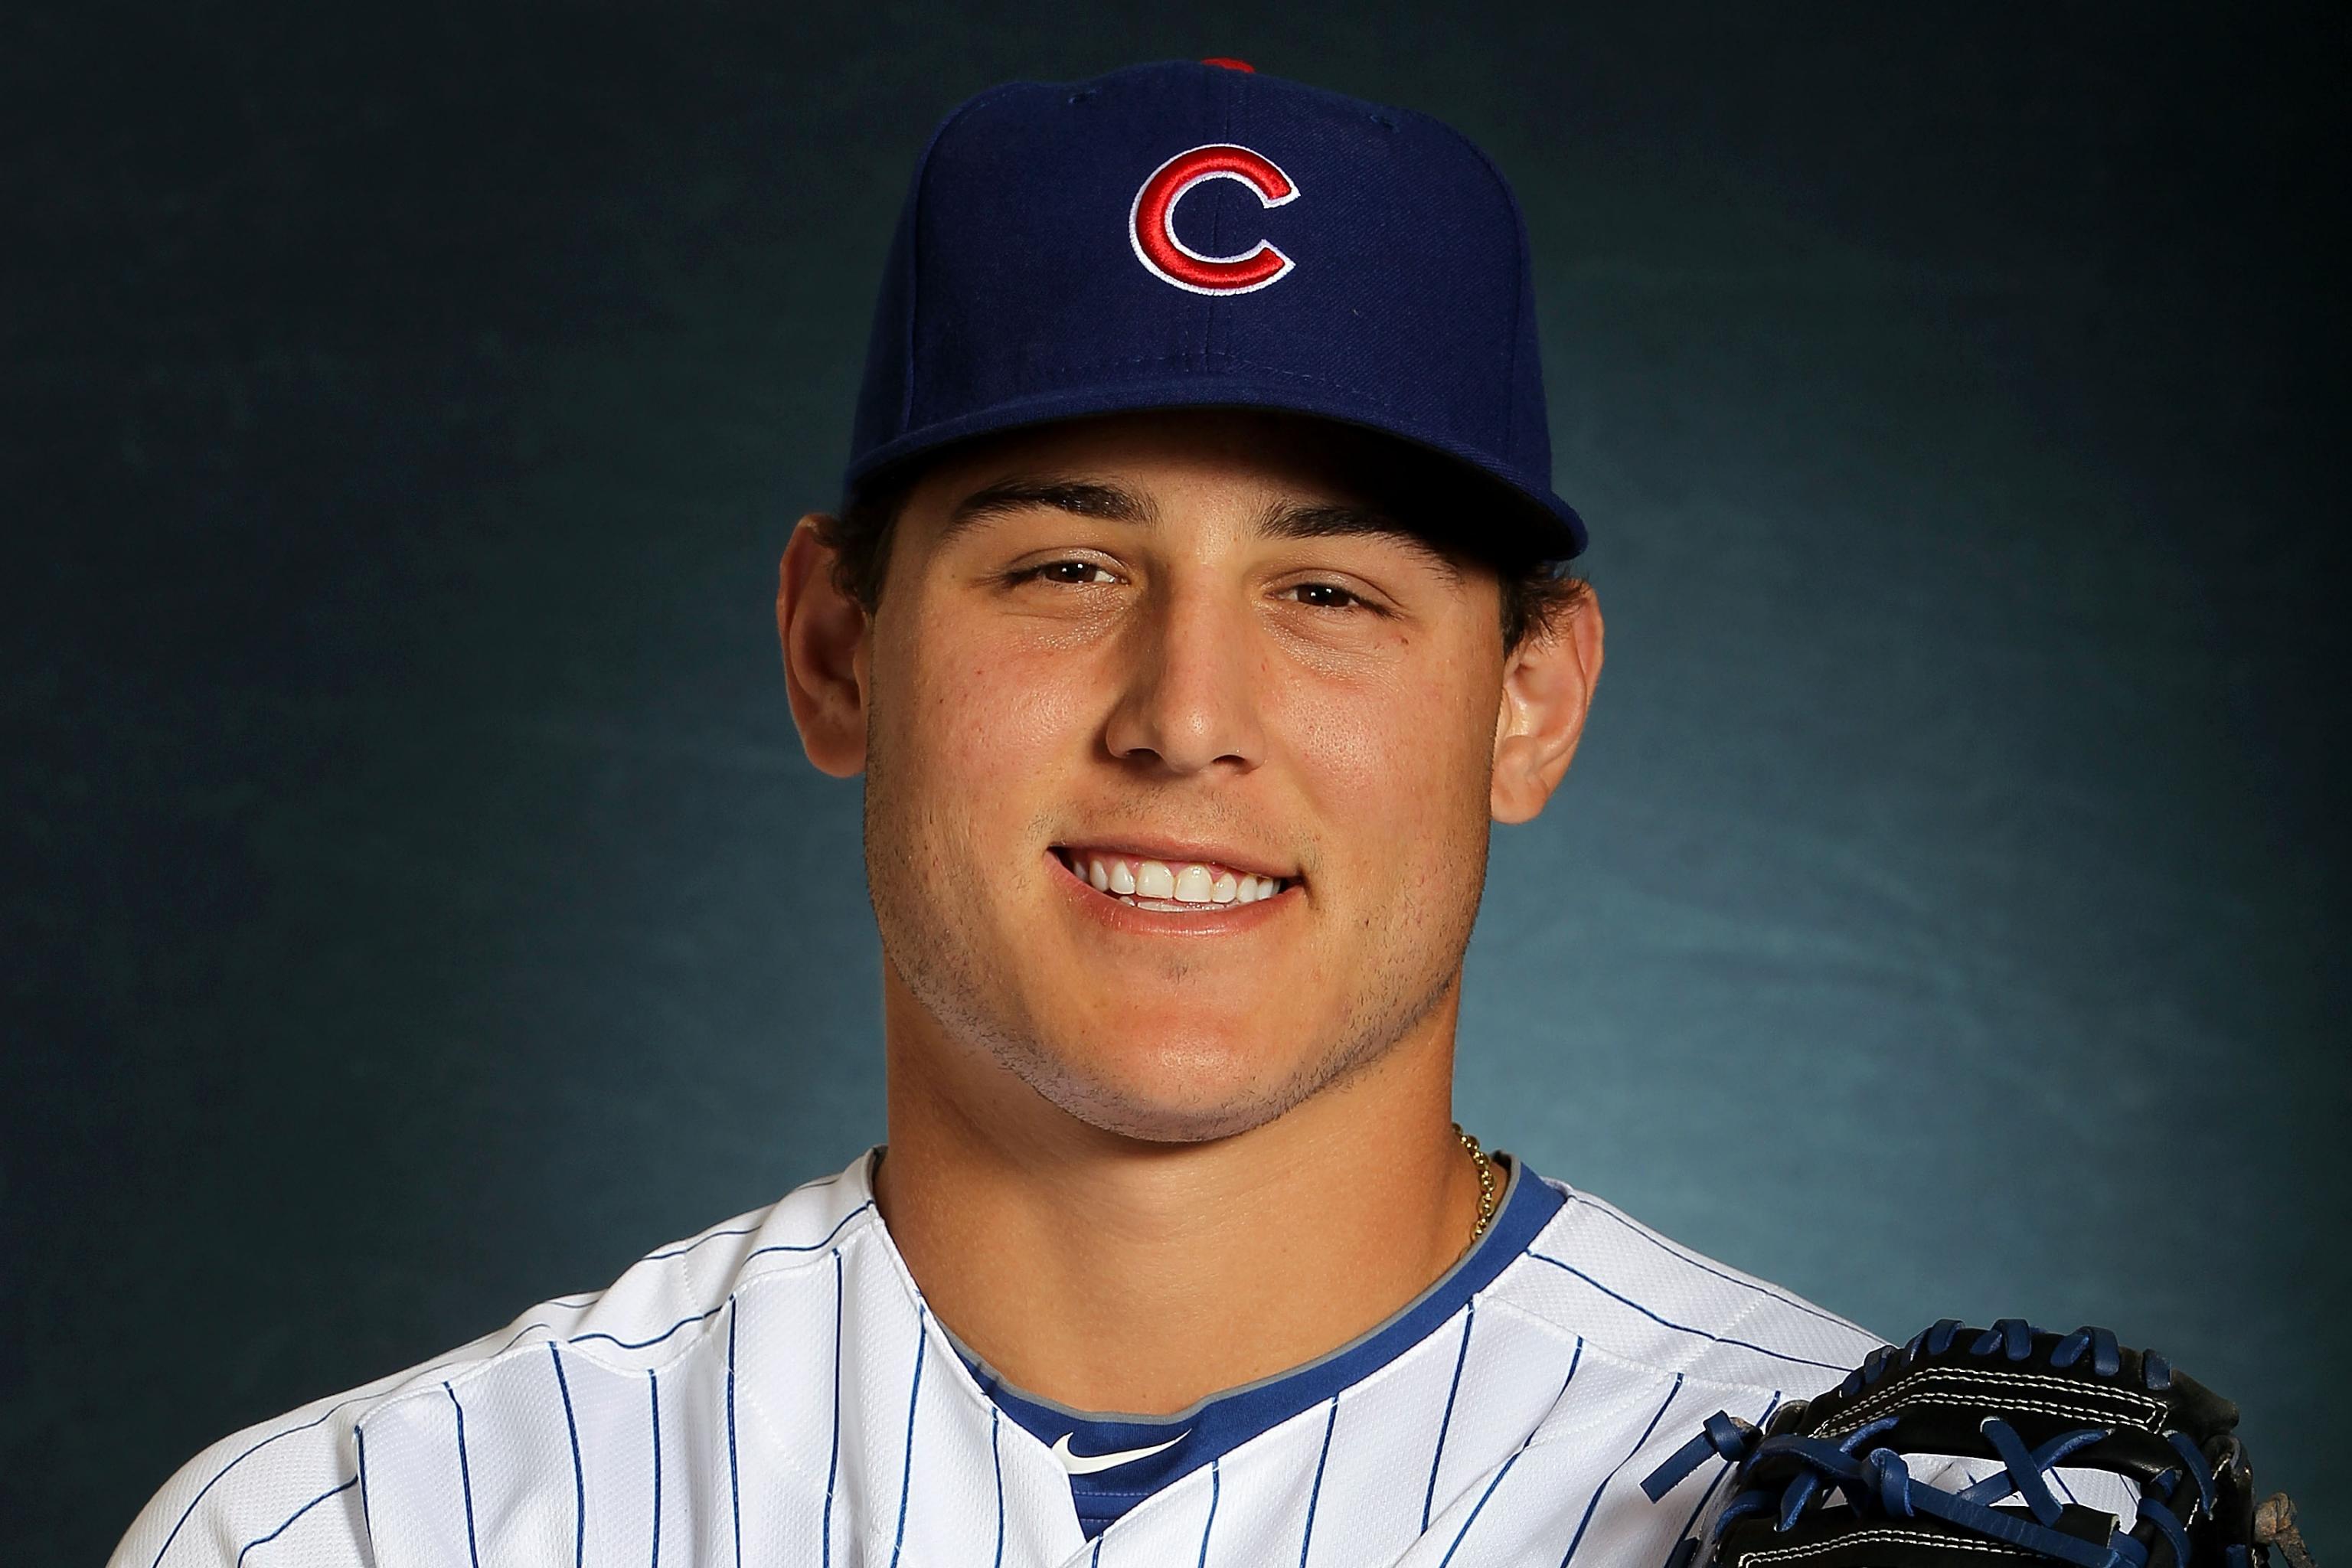 Cubs acquire Rizzo from Padres for Cashner